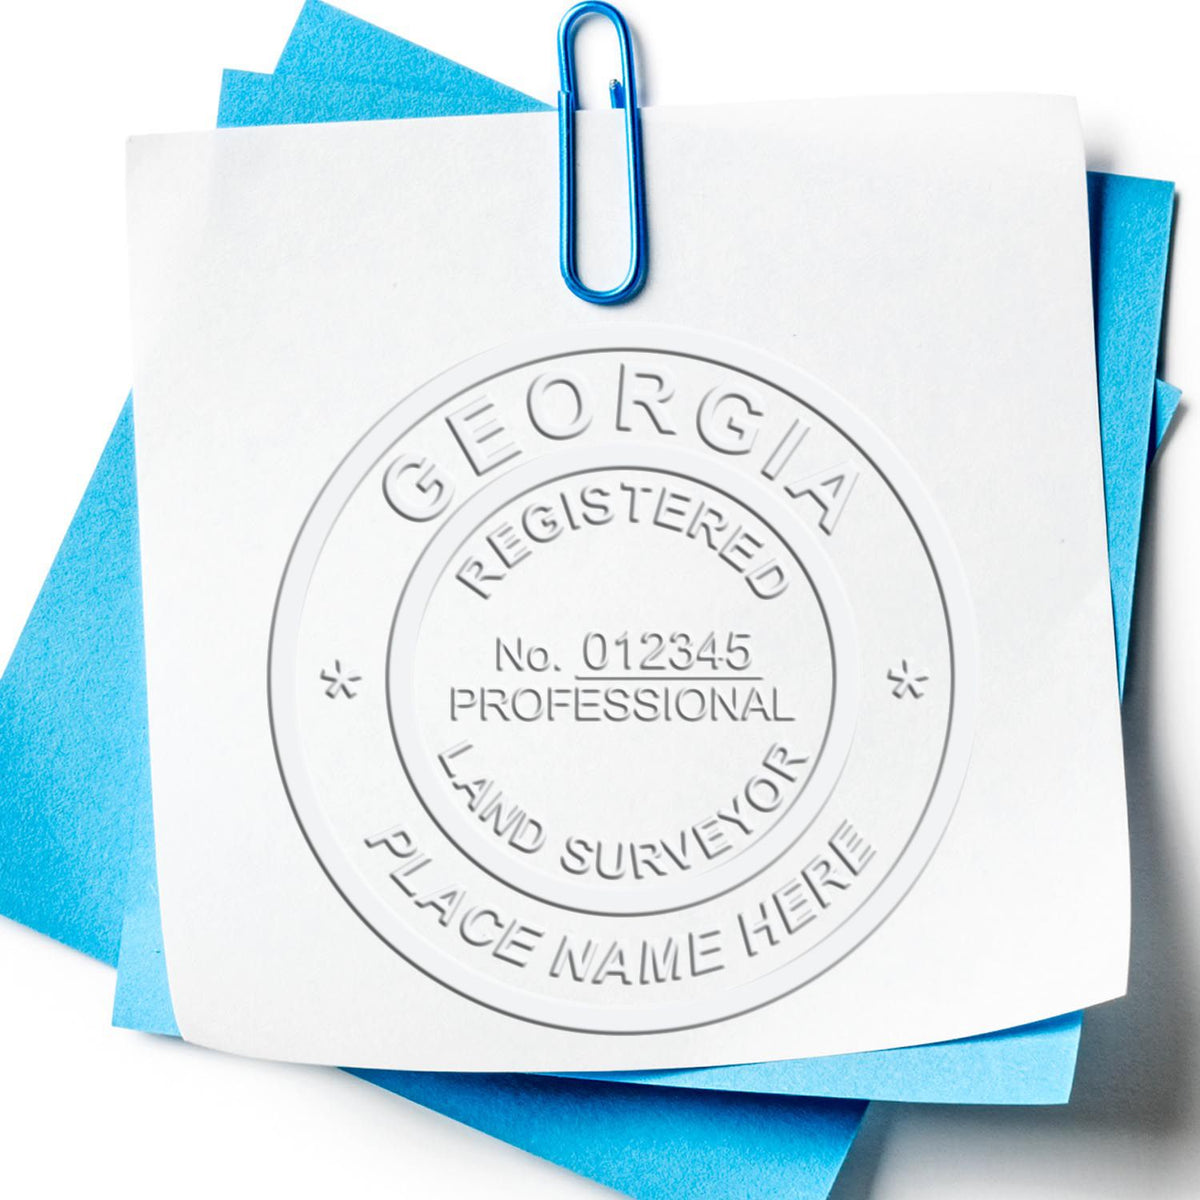 A stamped impression of the Handheld Georgia Land Surveyor Seal in this stylish lifestyle photo, setting the tone for a unique and personalized product.